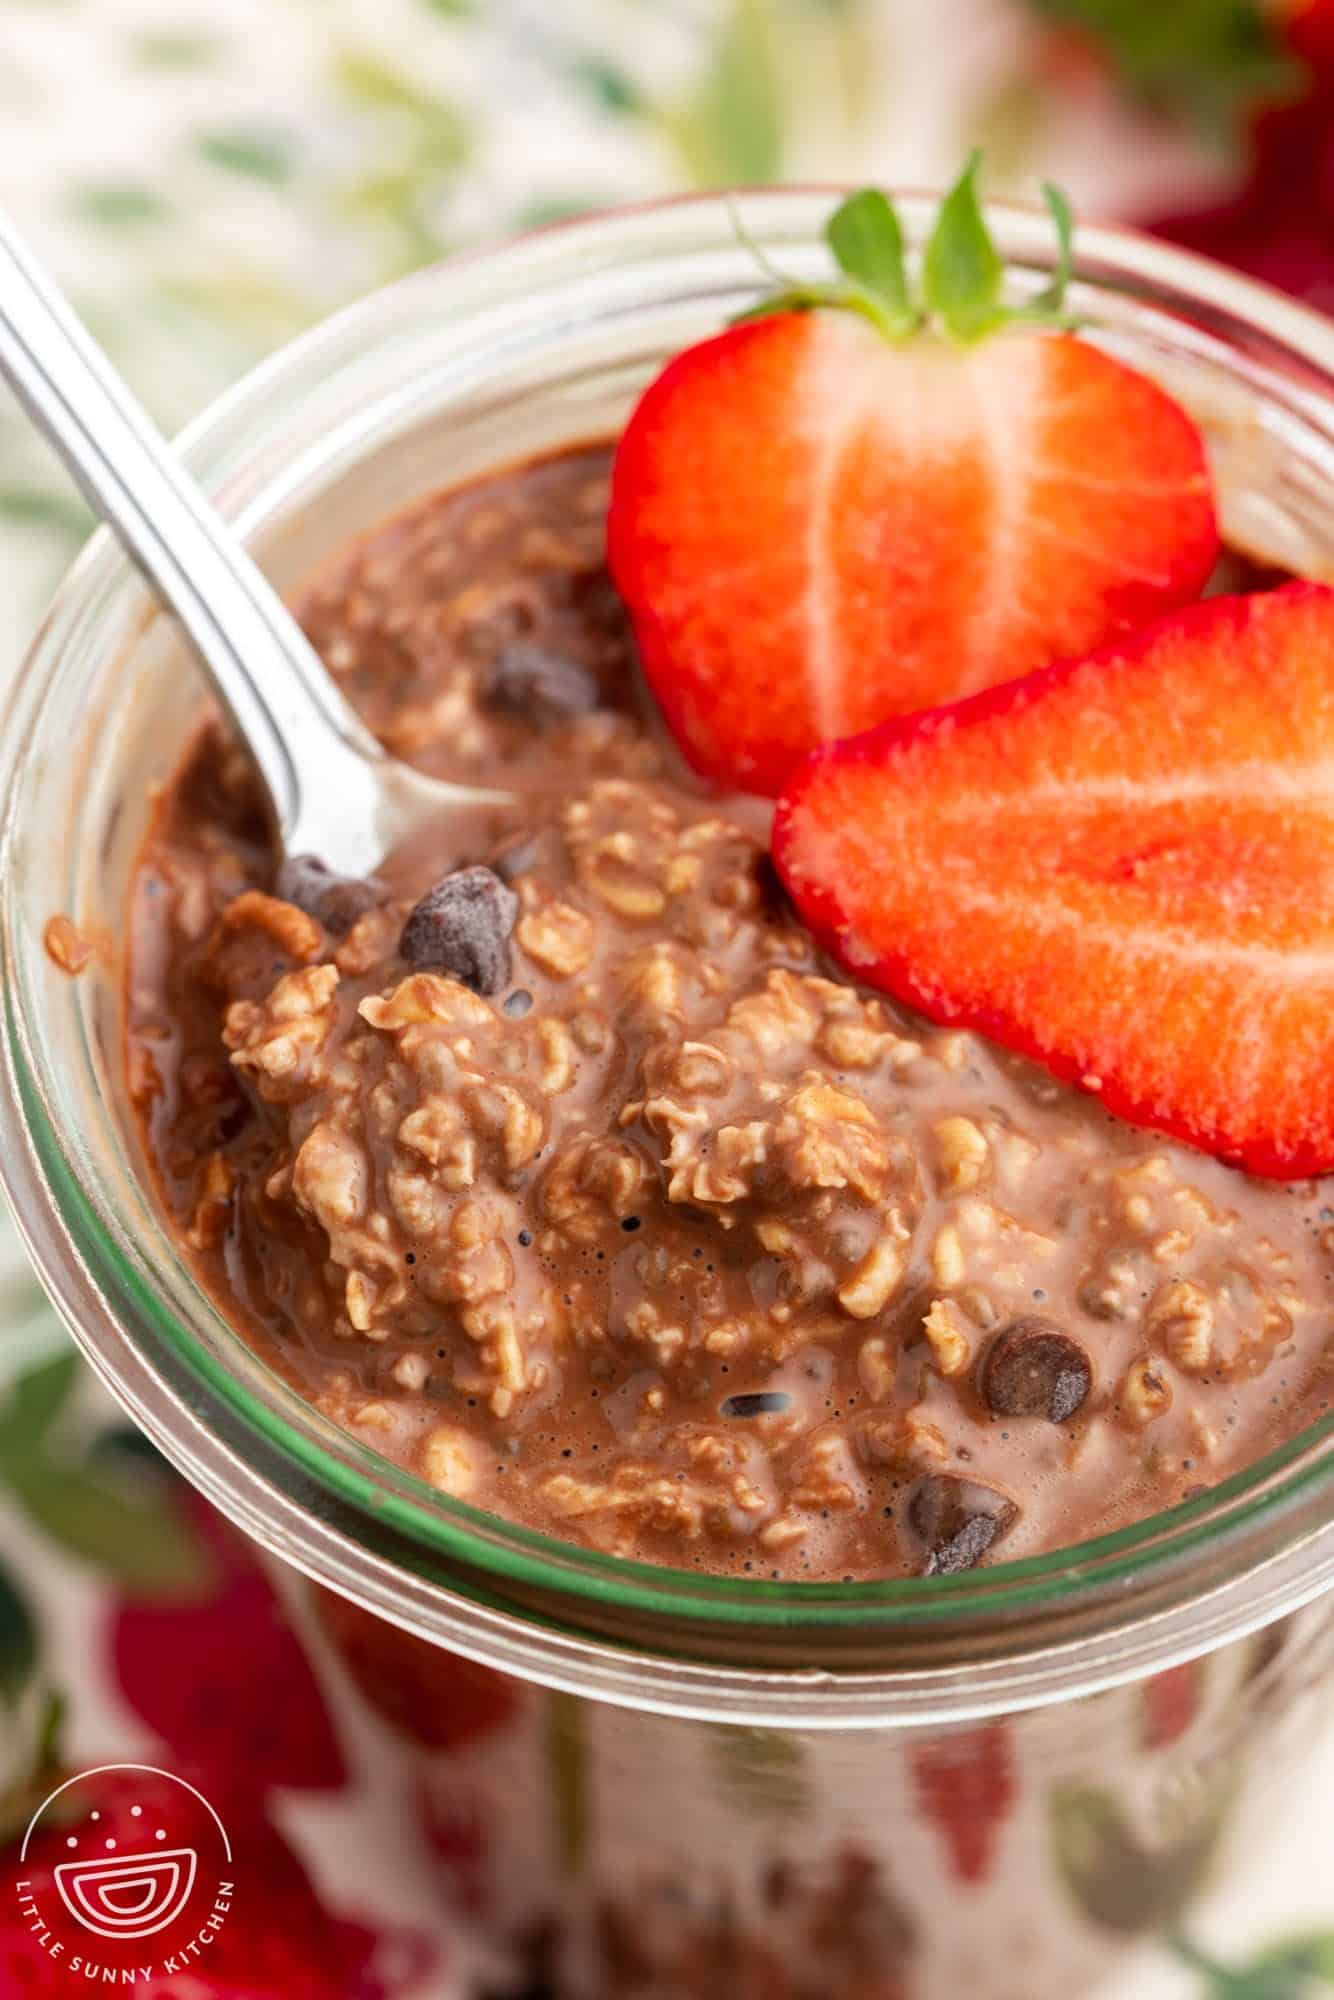 closeup of a jar of chocolate oatmeal with chocolate chips and strawberries.